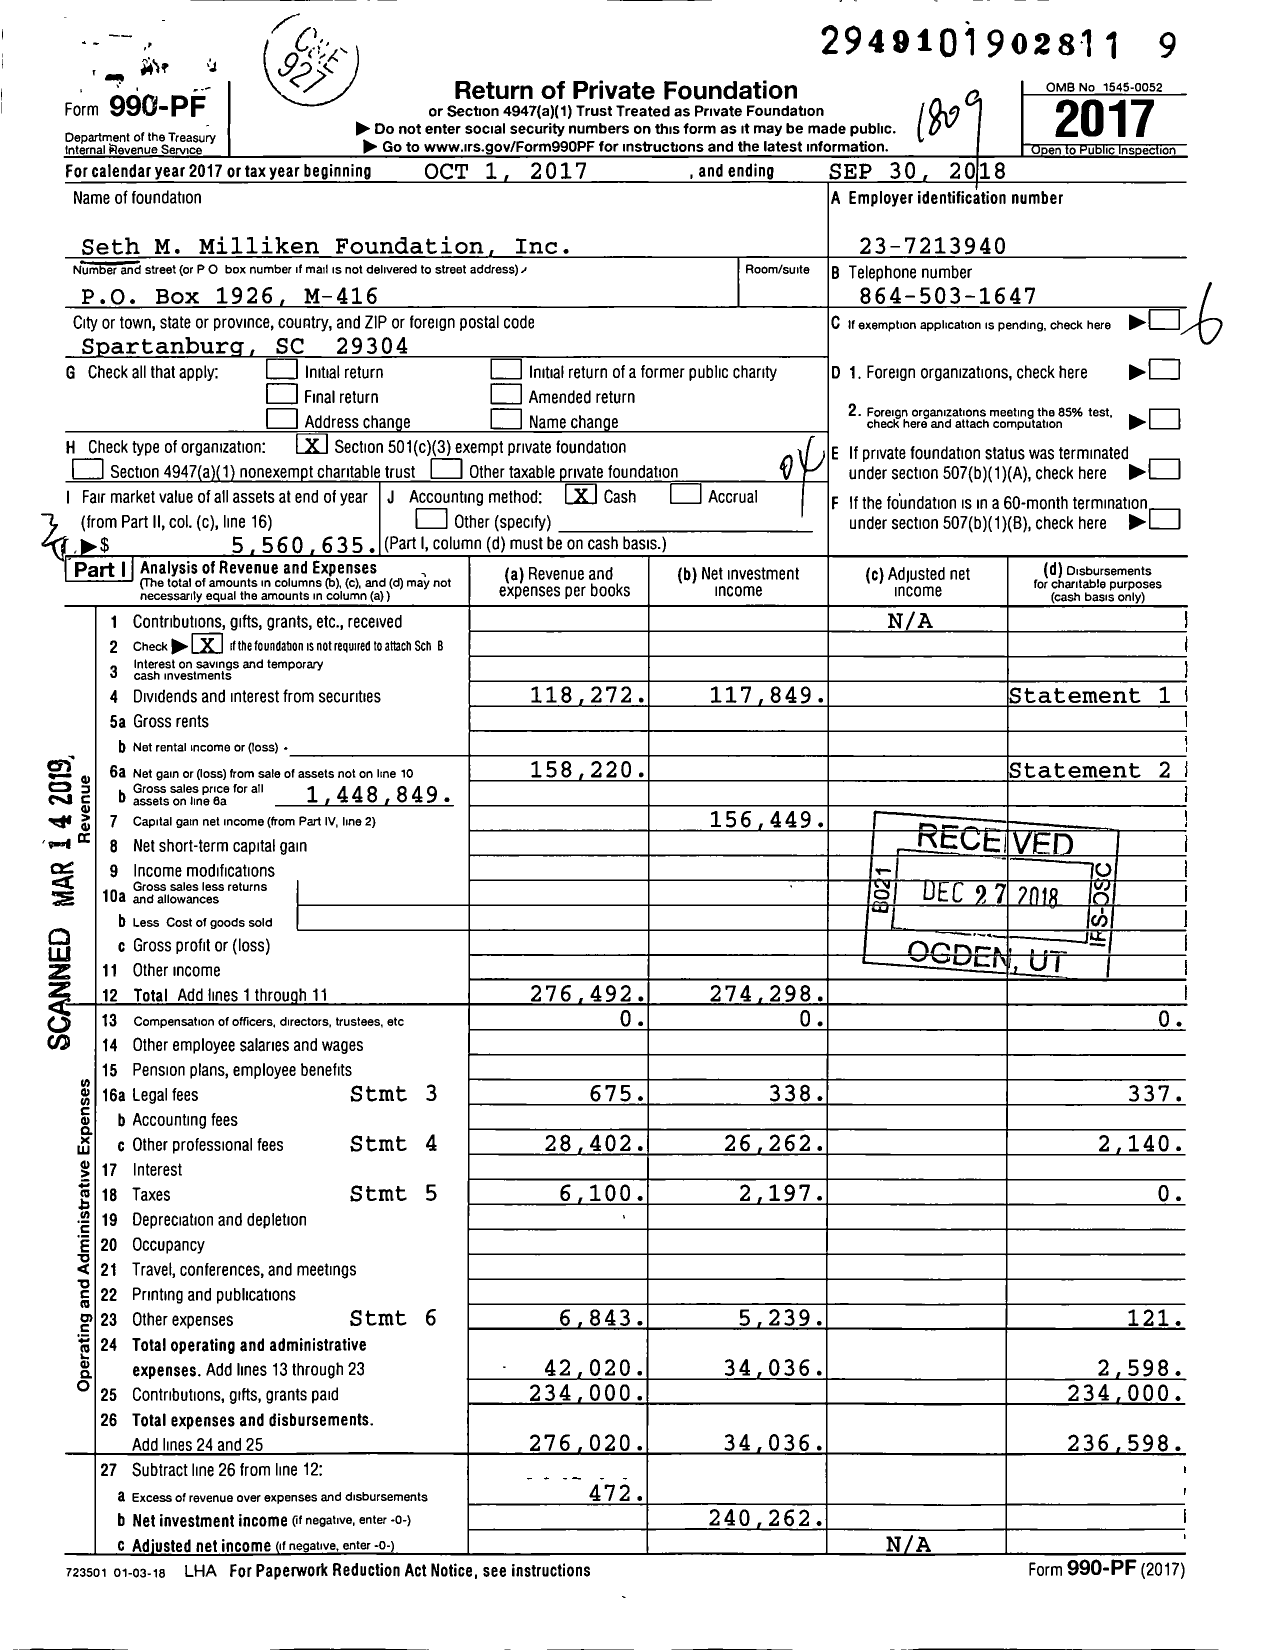 Image of first page of 2017 Form 990PF for Seth M Milliken Foundation